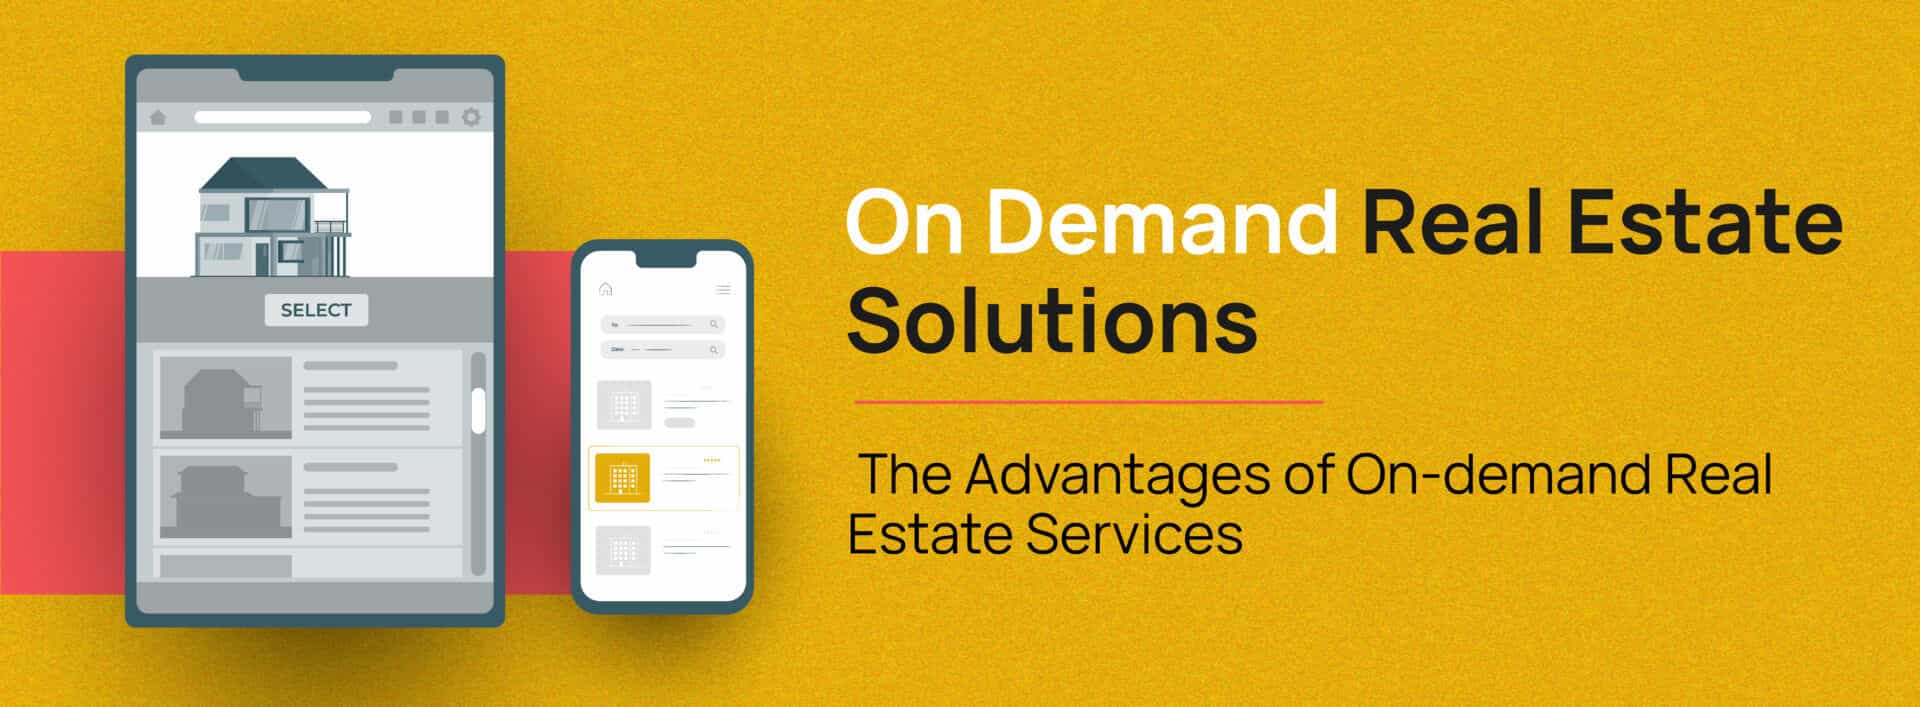 On Demand Real Estate Solutions